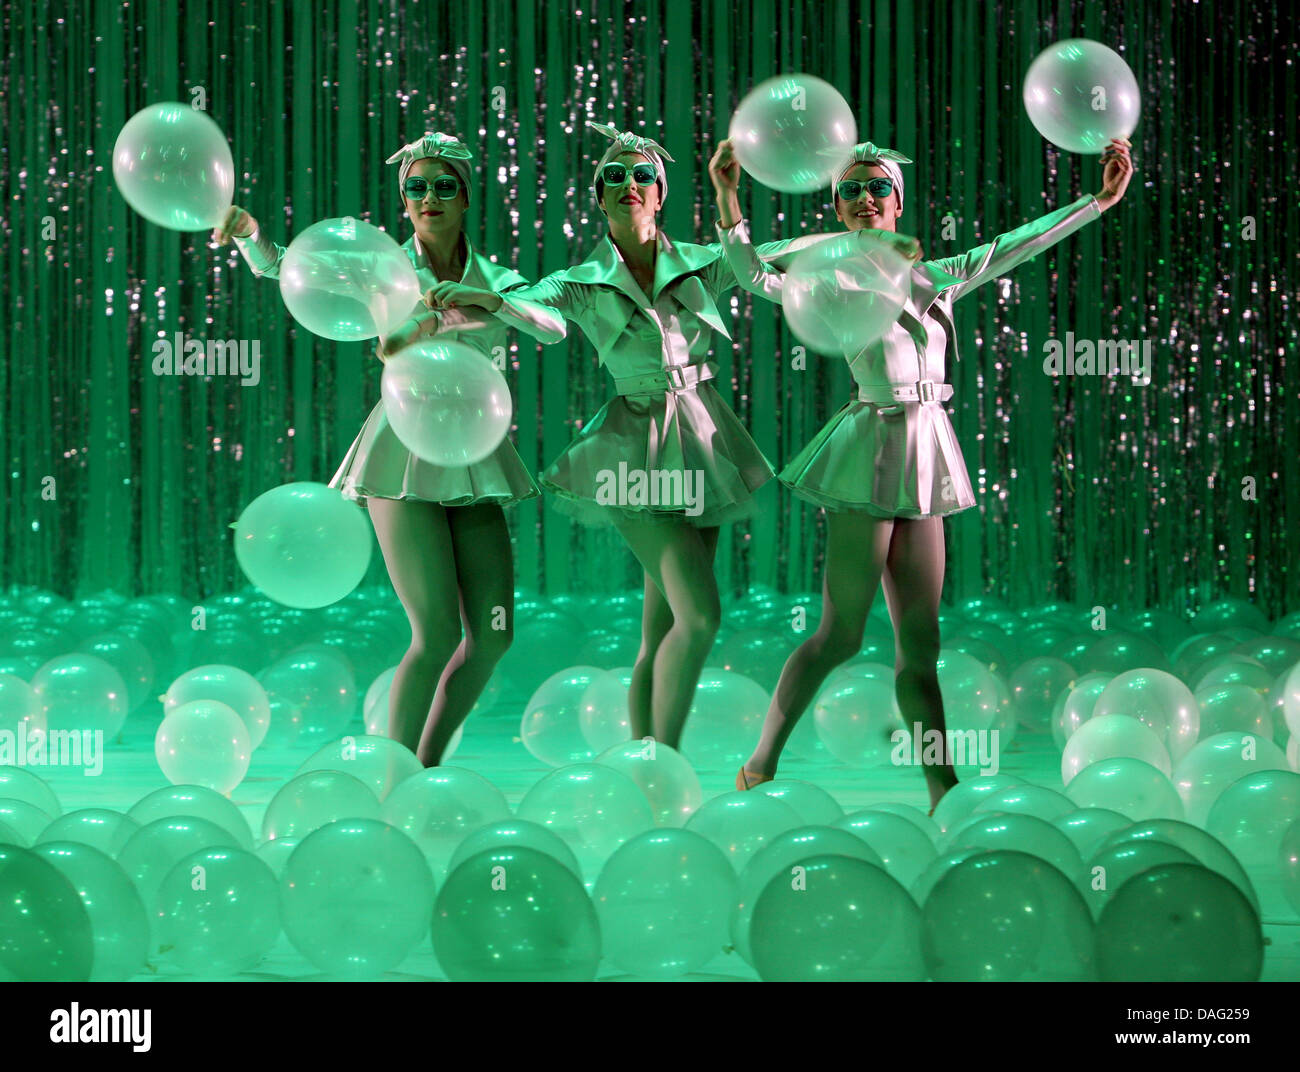 Dancers pose as the citizens of Emerald City during a dress rehearsal for the piece 'OZ - The Wonderful Wizard' at the Komische Oper opera house in Berlin, Germany, 11 March 2011. The piece will premiere on 12 March, featuring a choreography by Giorgio Madia and music by Dmitri D. Shostakovich. Photo: Stephanie Pilick Stock Photo